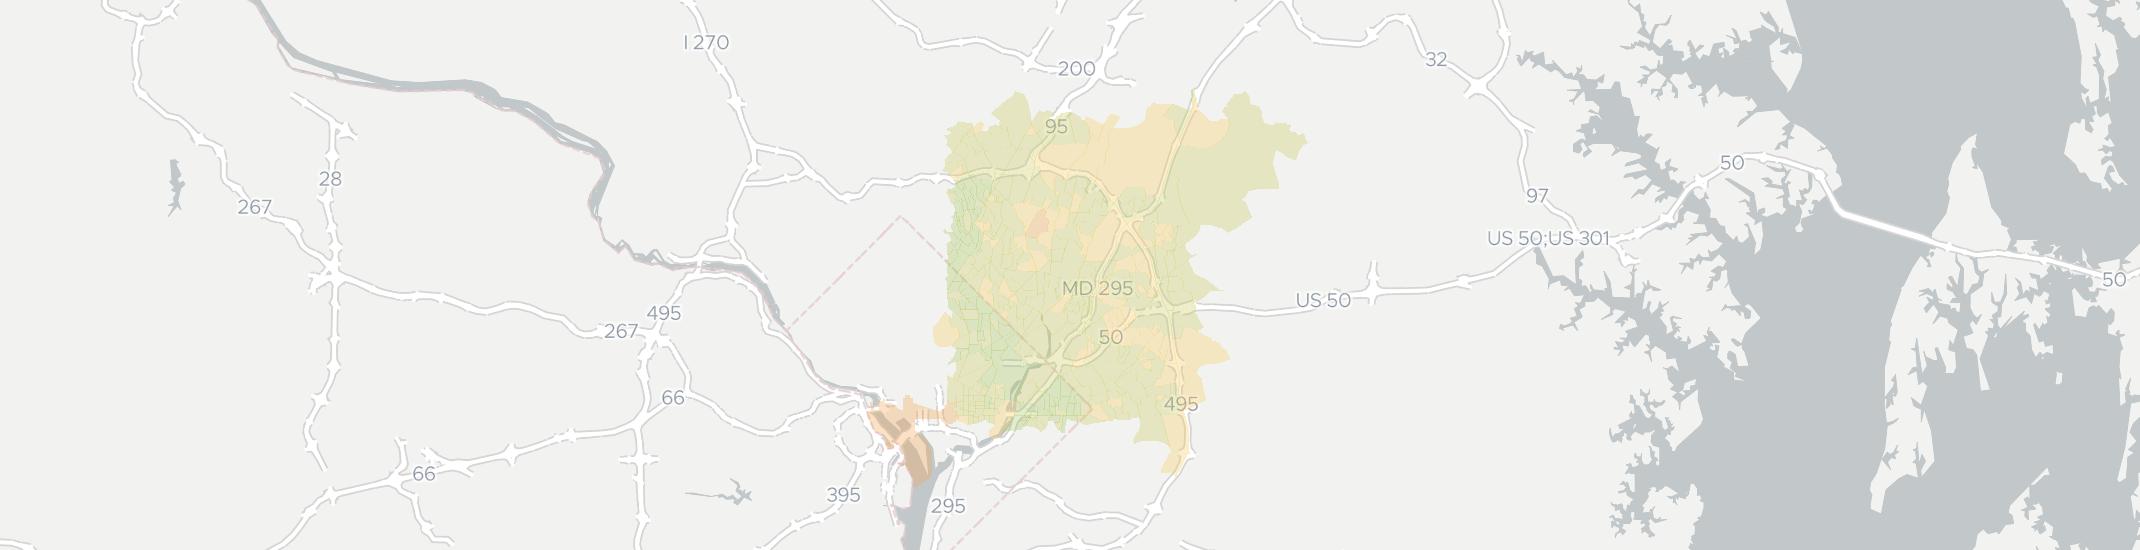 Hyattsville Internet Competition Map. Click for interactive map